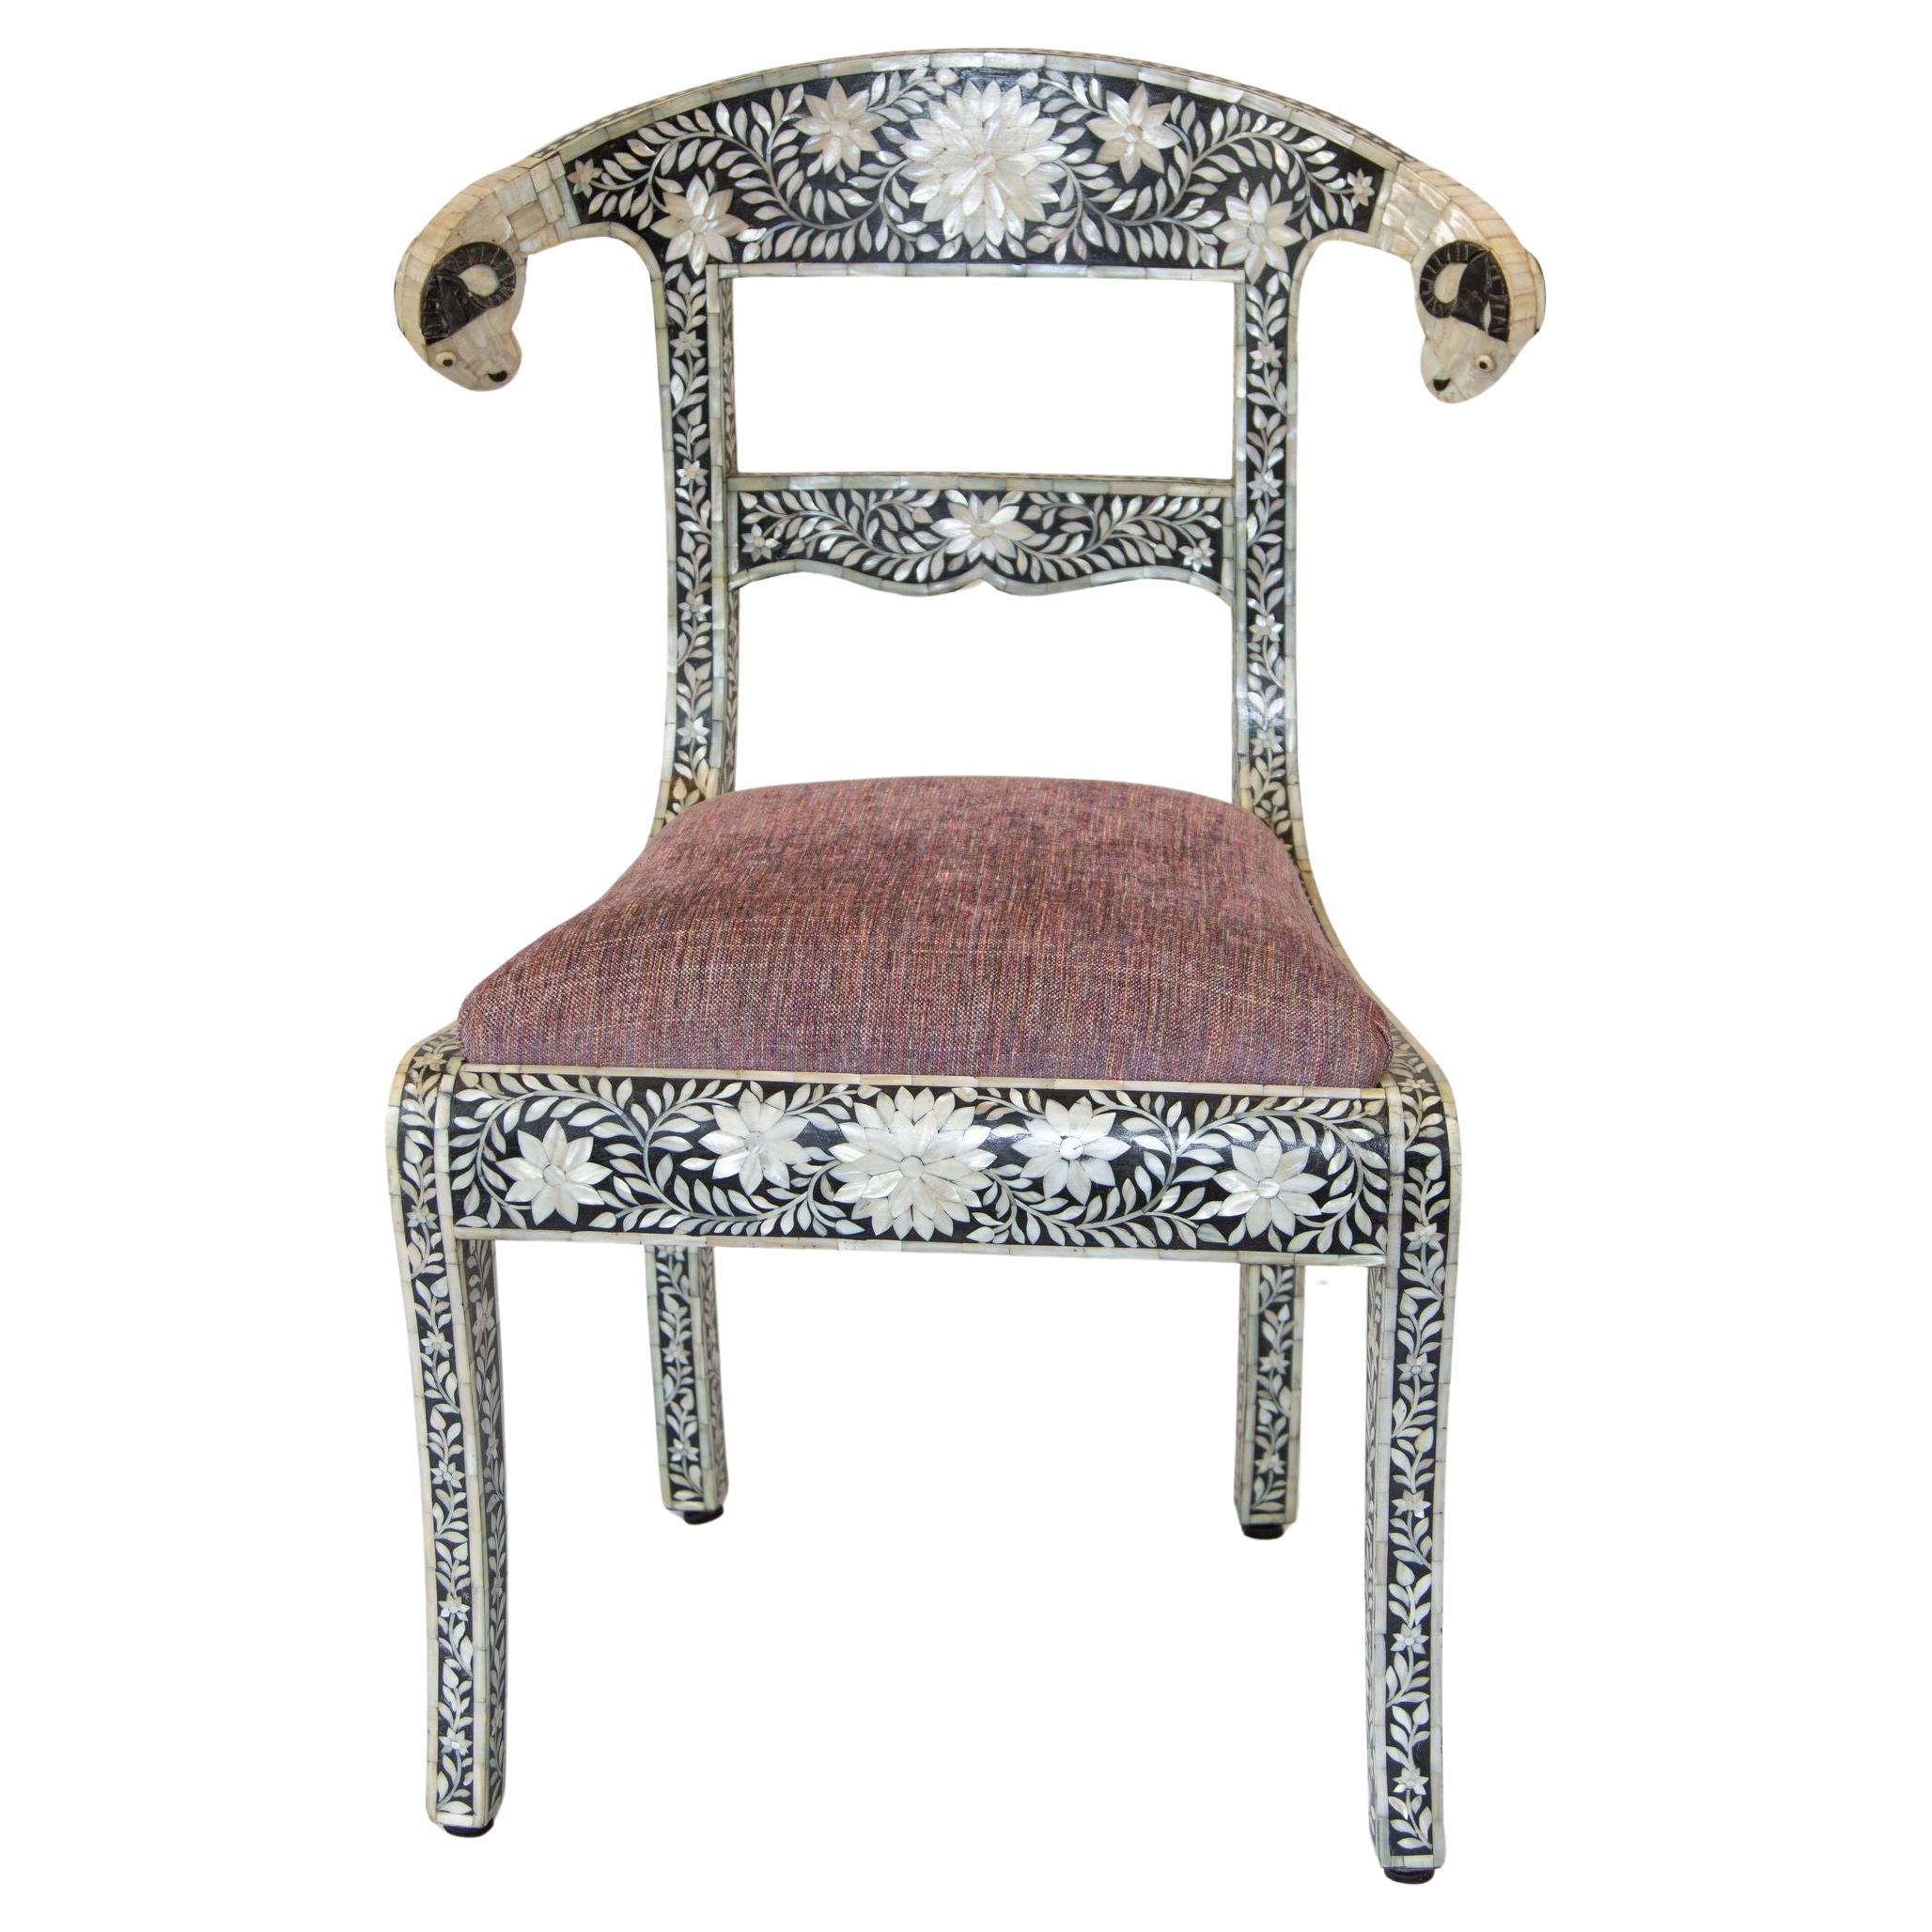 Anglo-Indian Mughal Mother of Pearl Inlaid Side Chair with Ram's Head